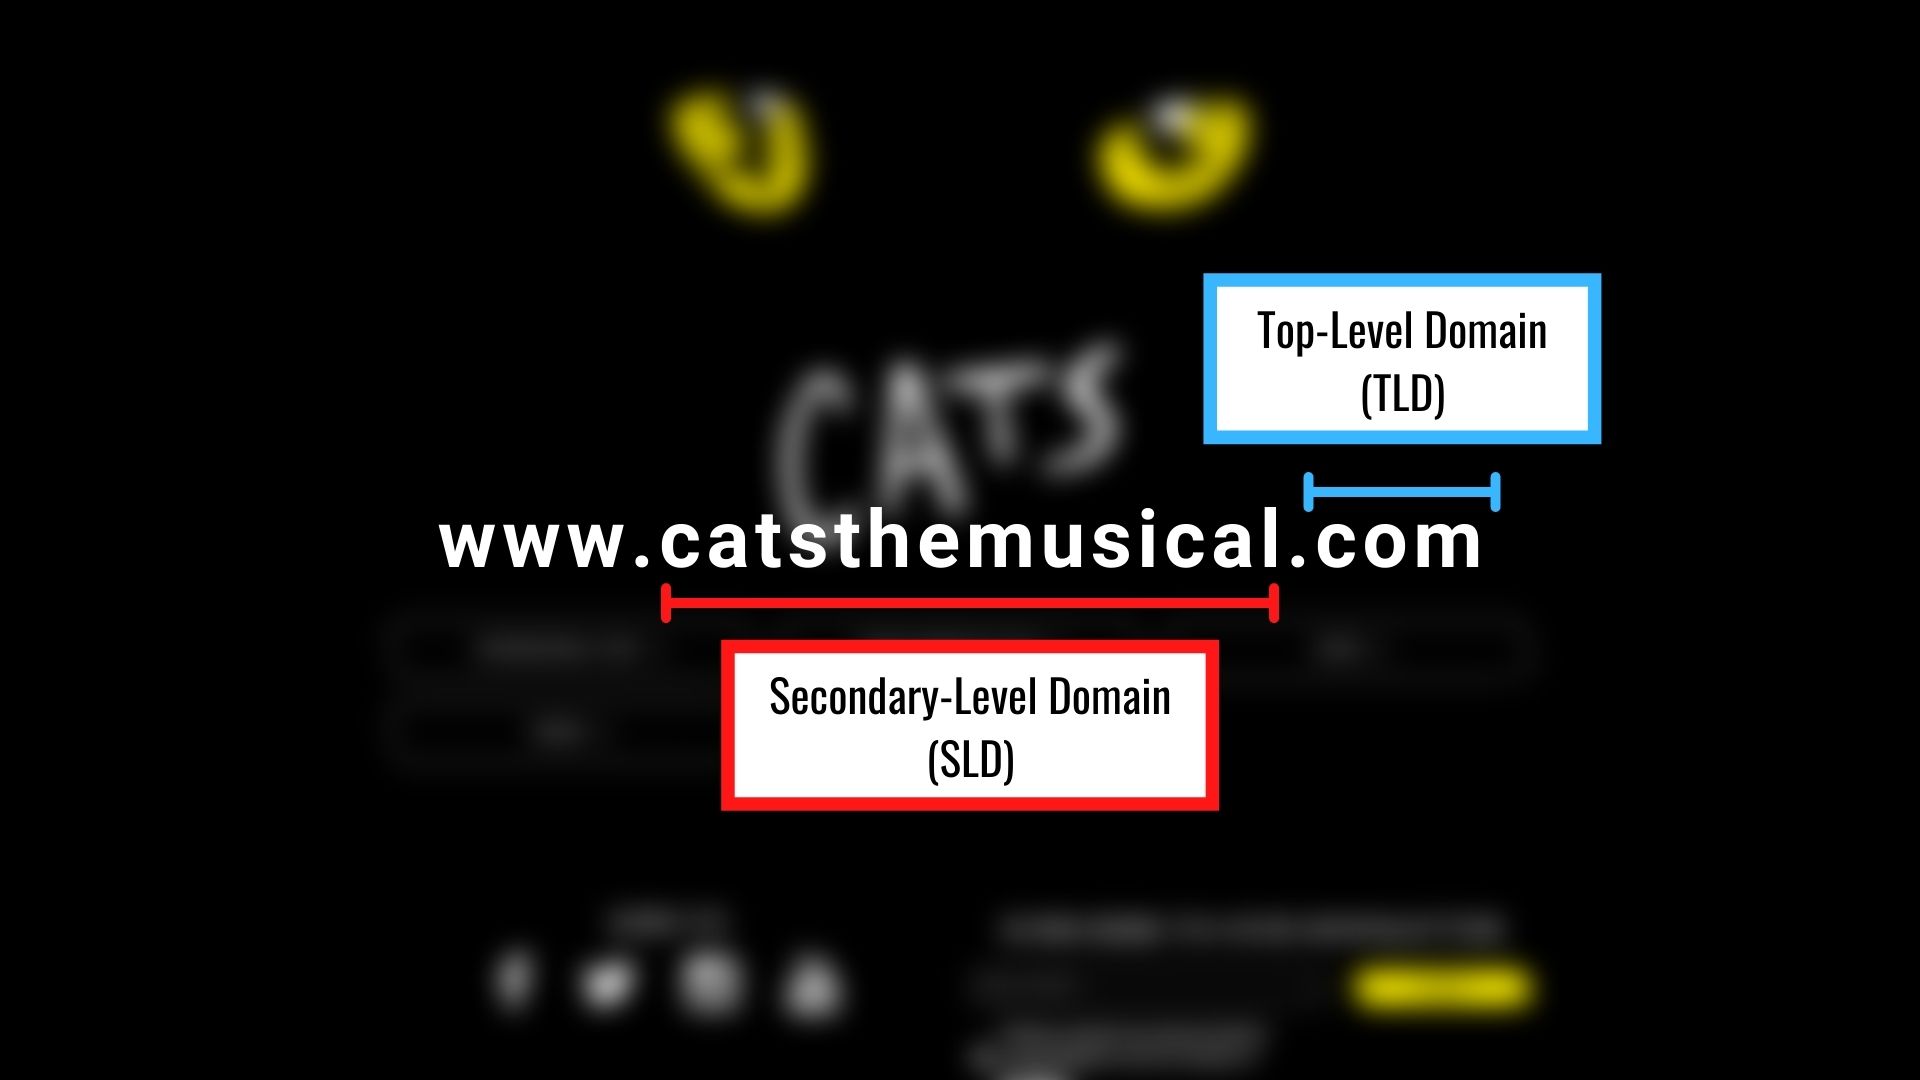 Secondary-level domain typically refers to your name, while top-level domain refers to the very end of your URL link